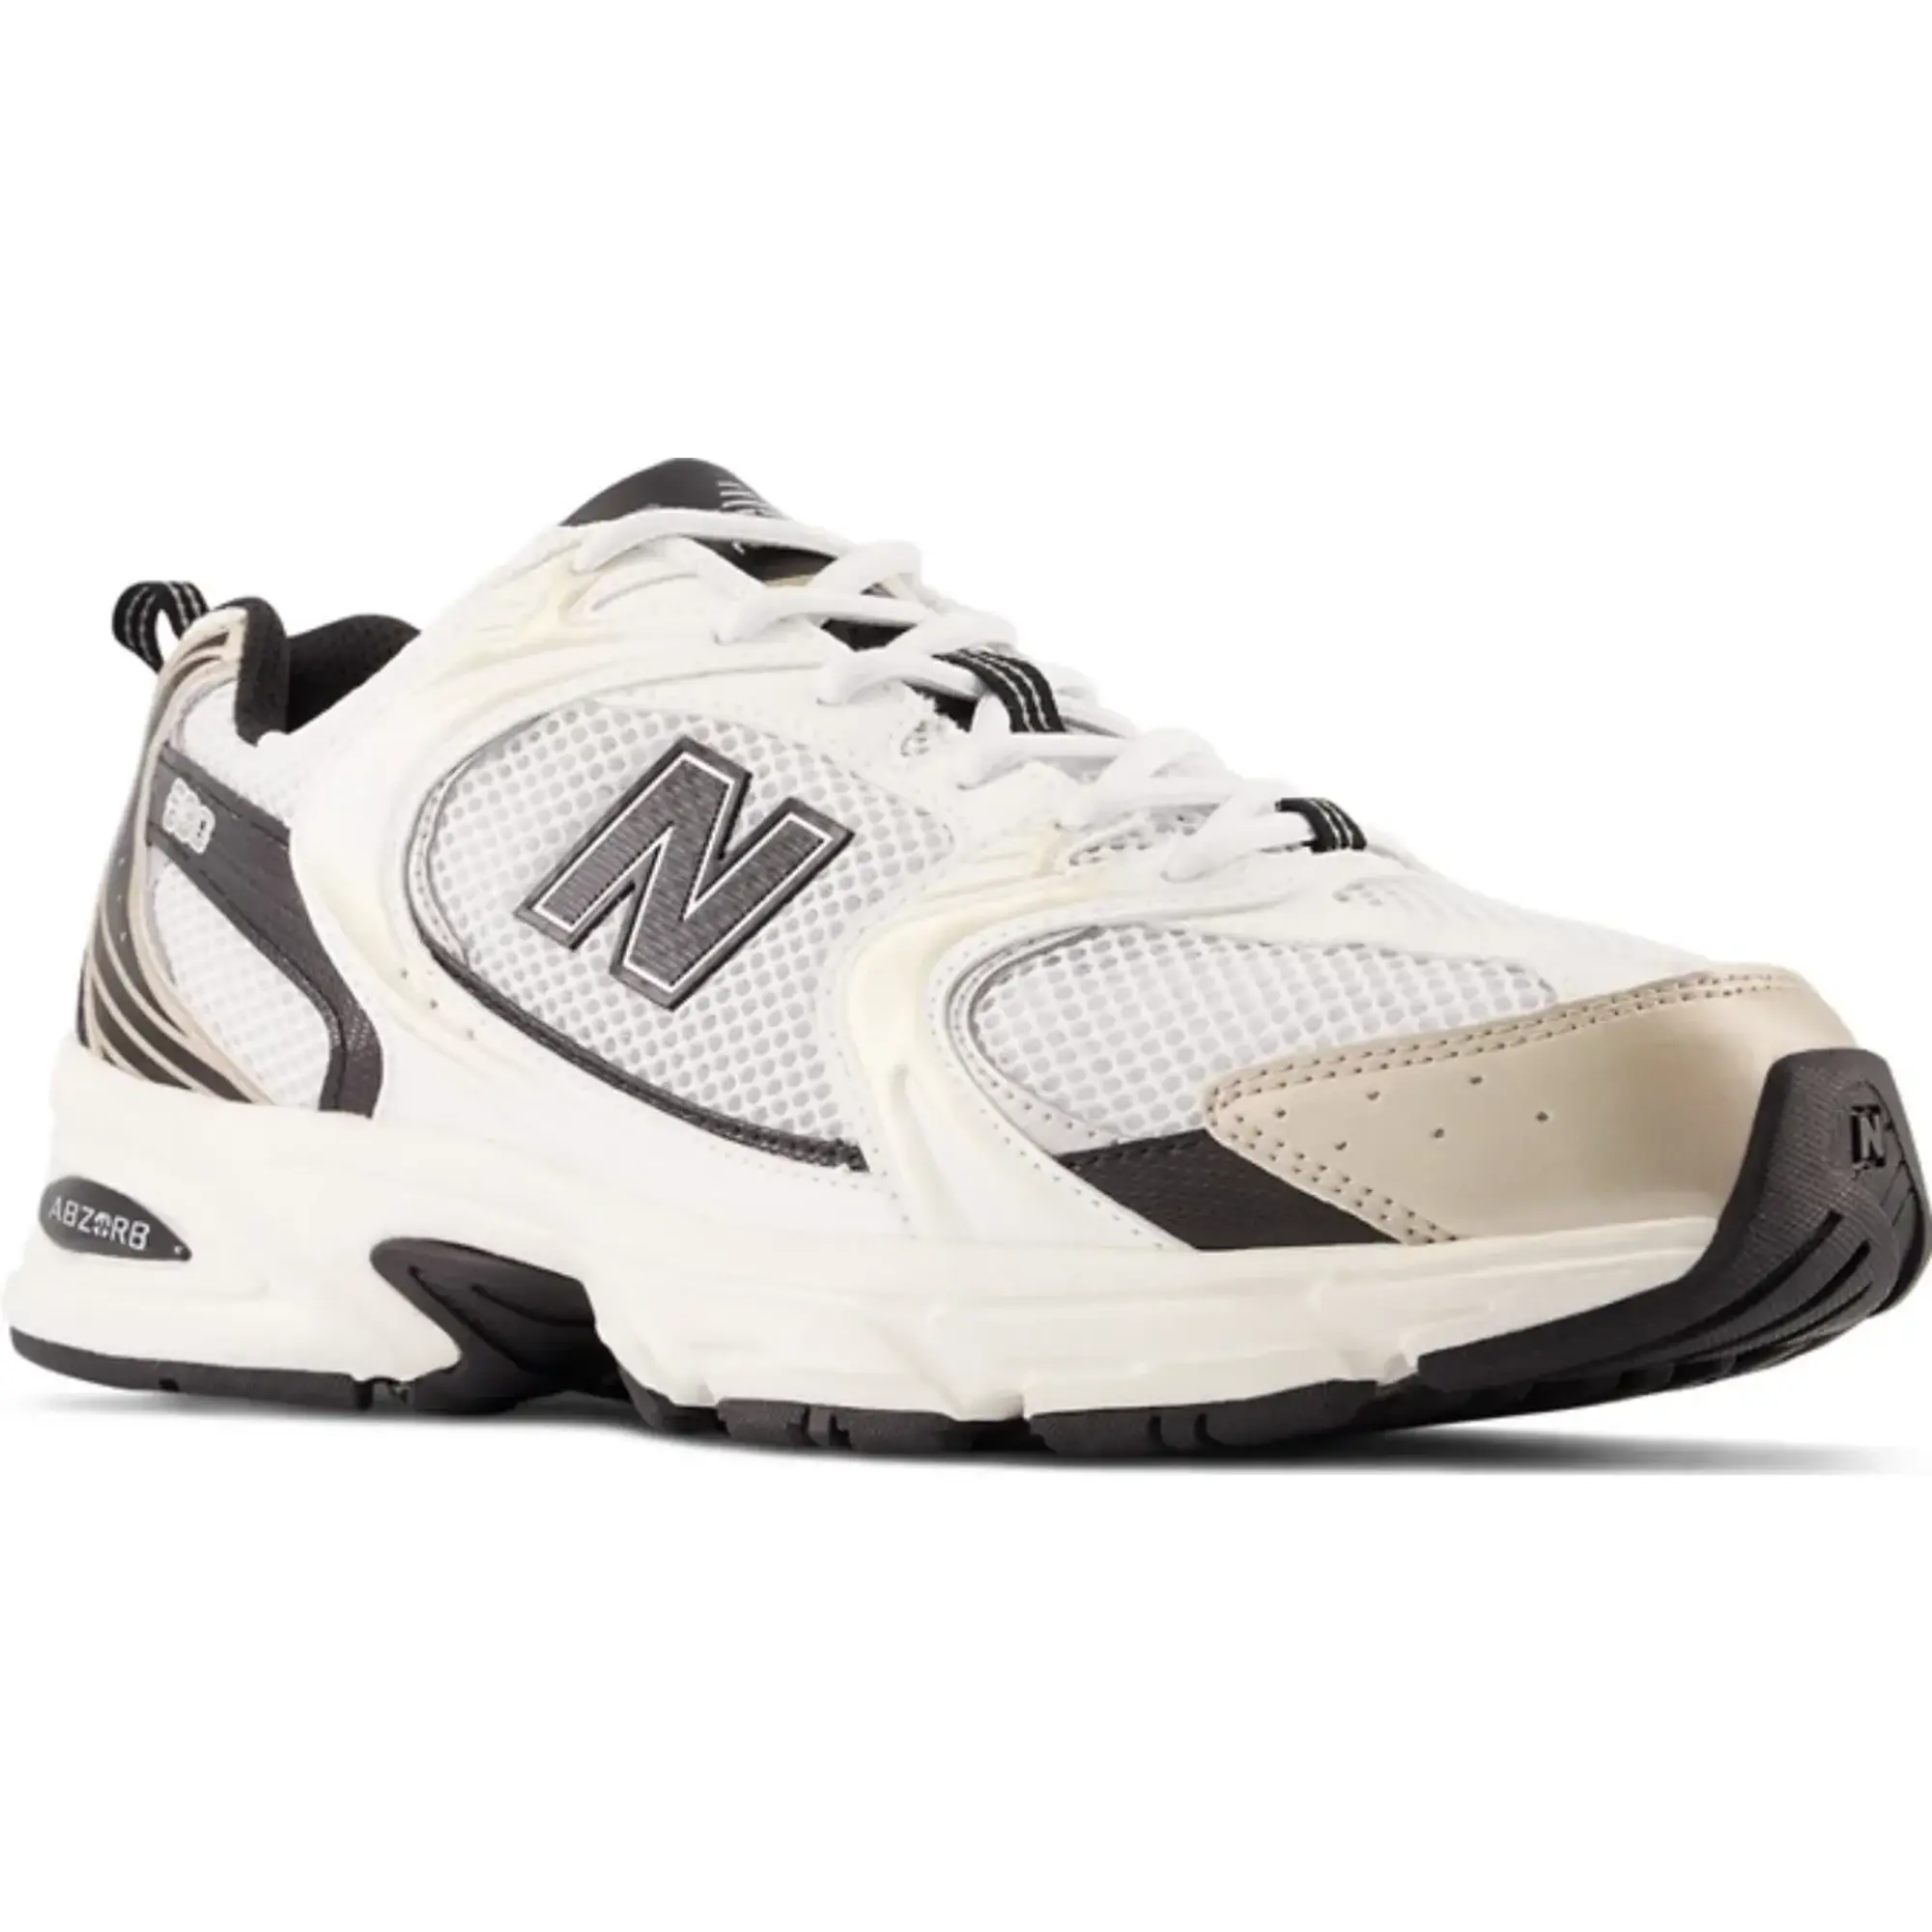 New Balance 530 Trainers In White With Black And Gold Detailing